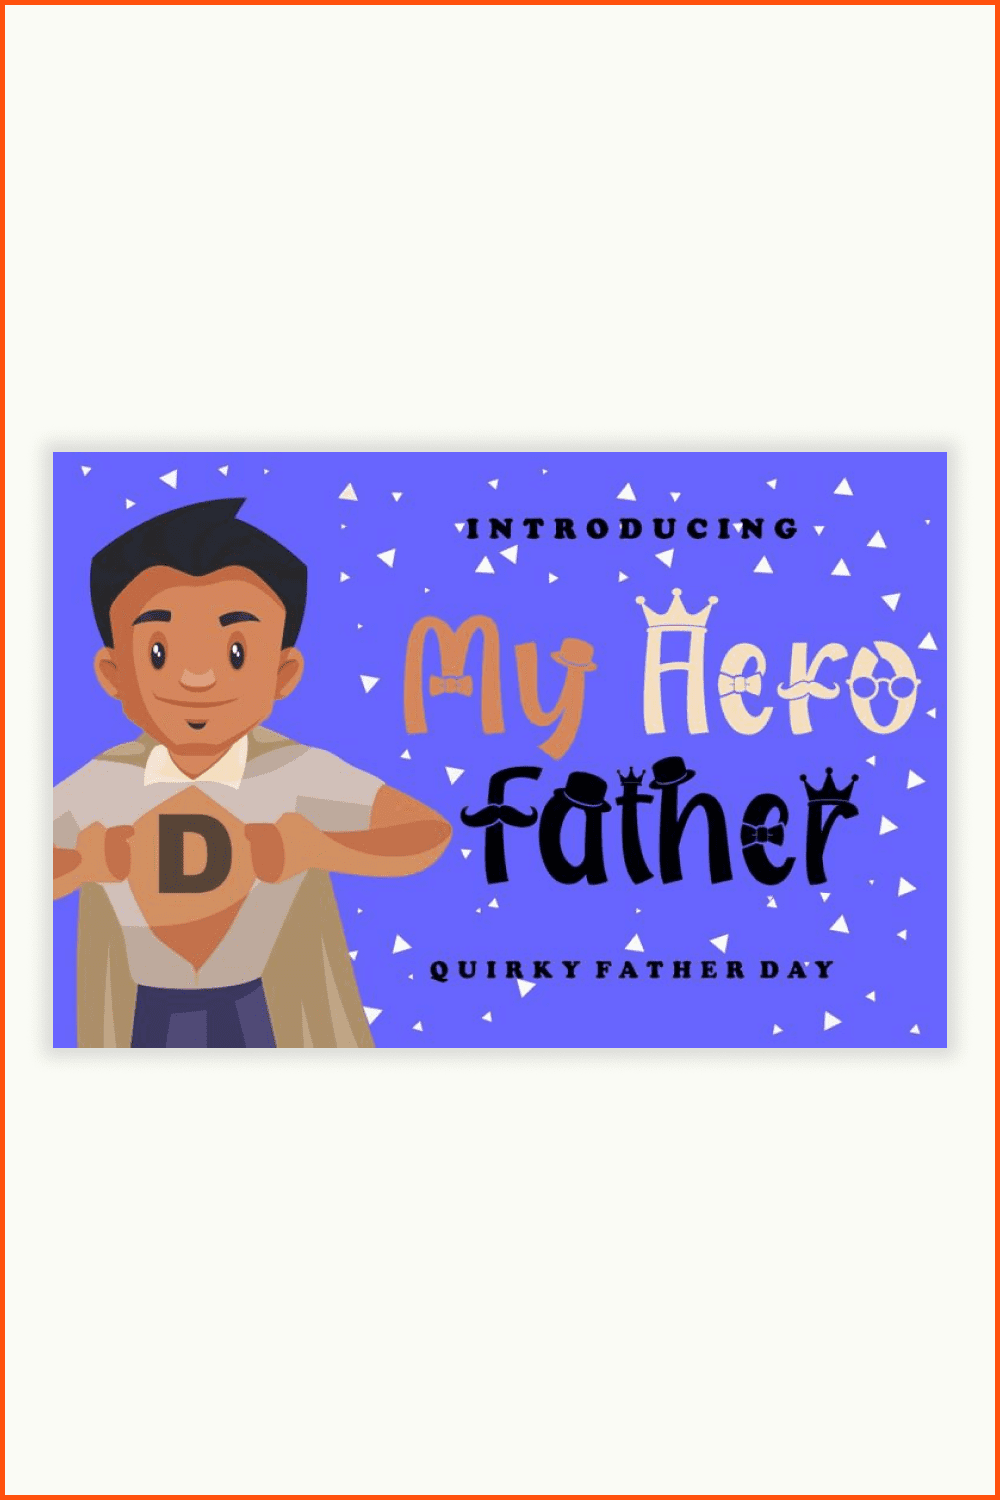 My Hero Father Font by PutraCetol Studio.